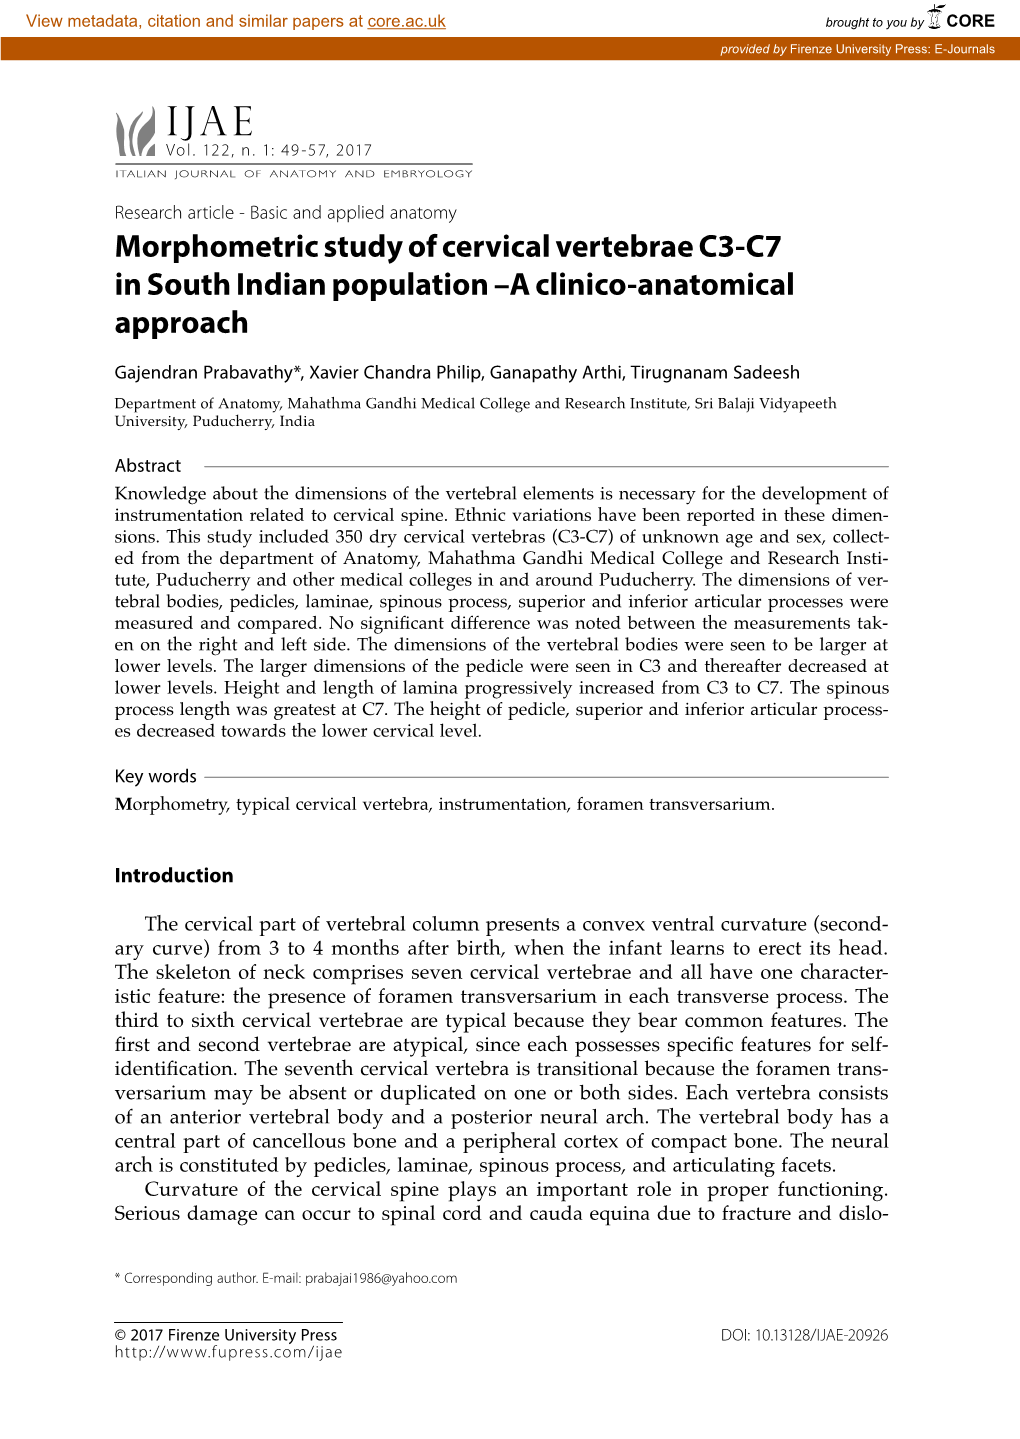 Morphometric Study of Cervical Vertebrae C3-C7 in South Indian Population –A Clinico-Anatomical Approach